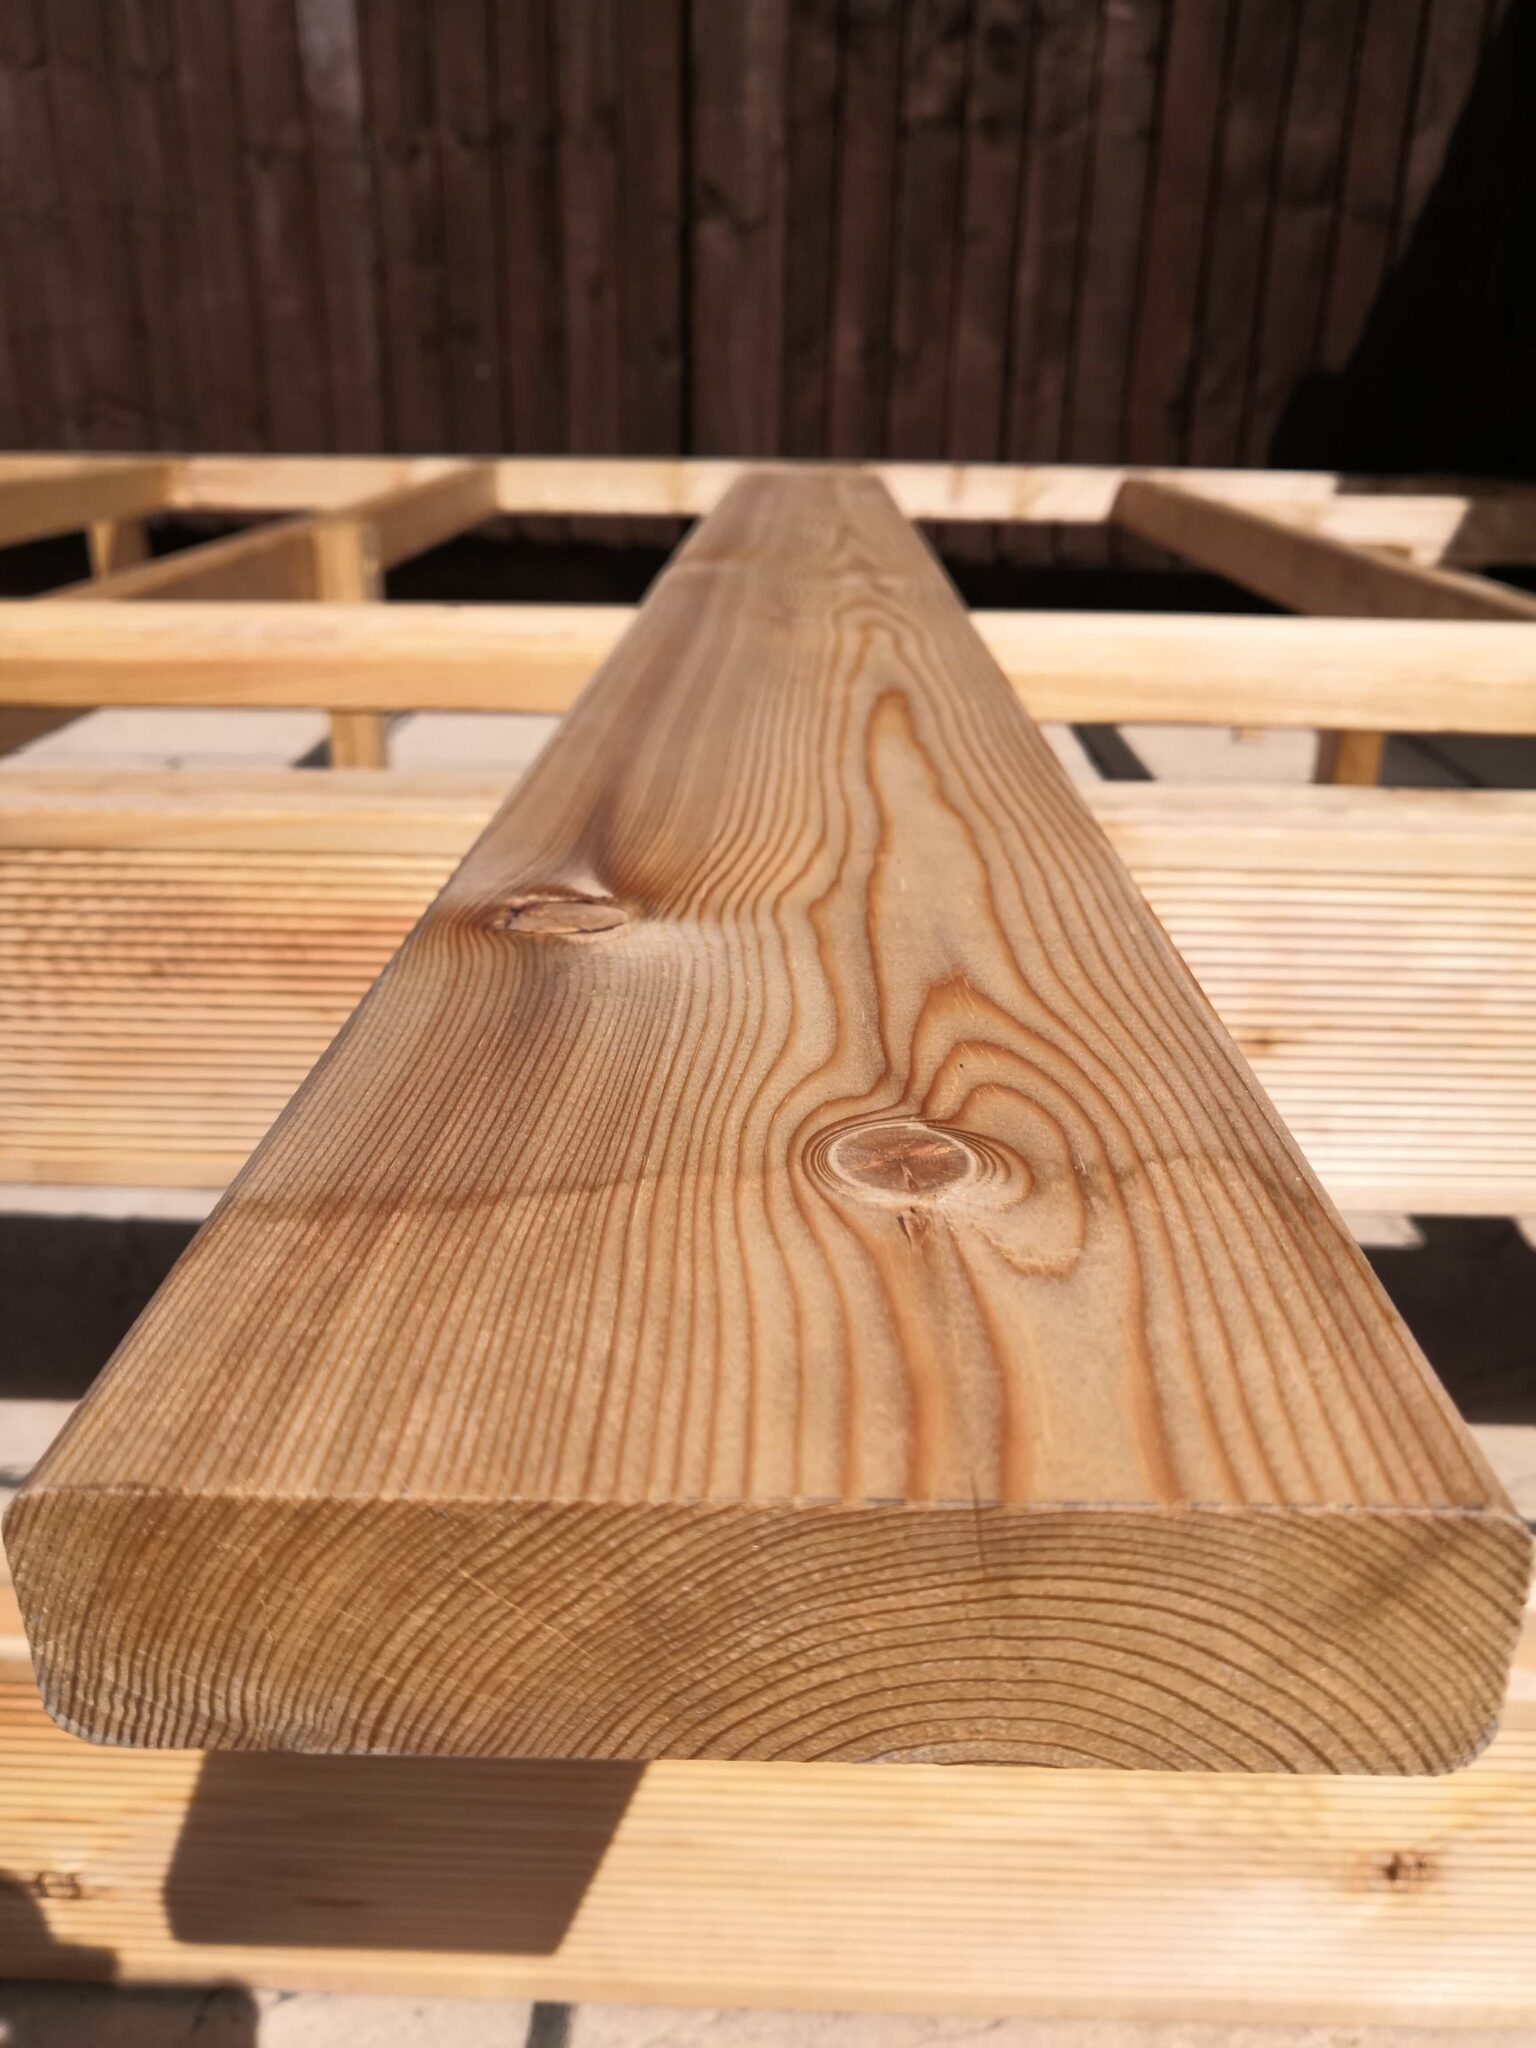 Siberian larch smooth timber decking boards - The Larch Barn